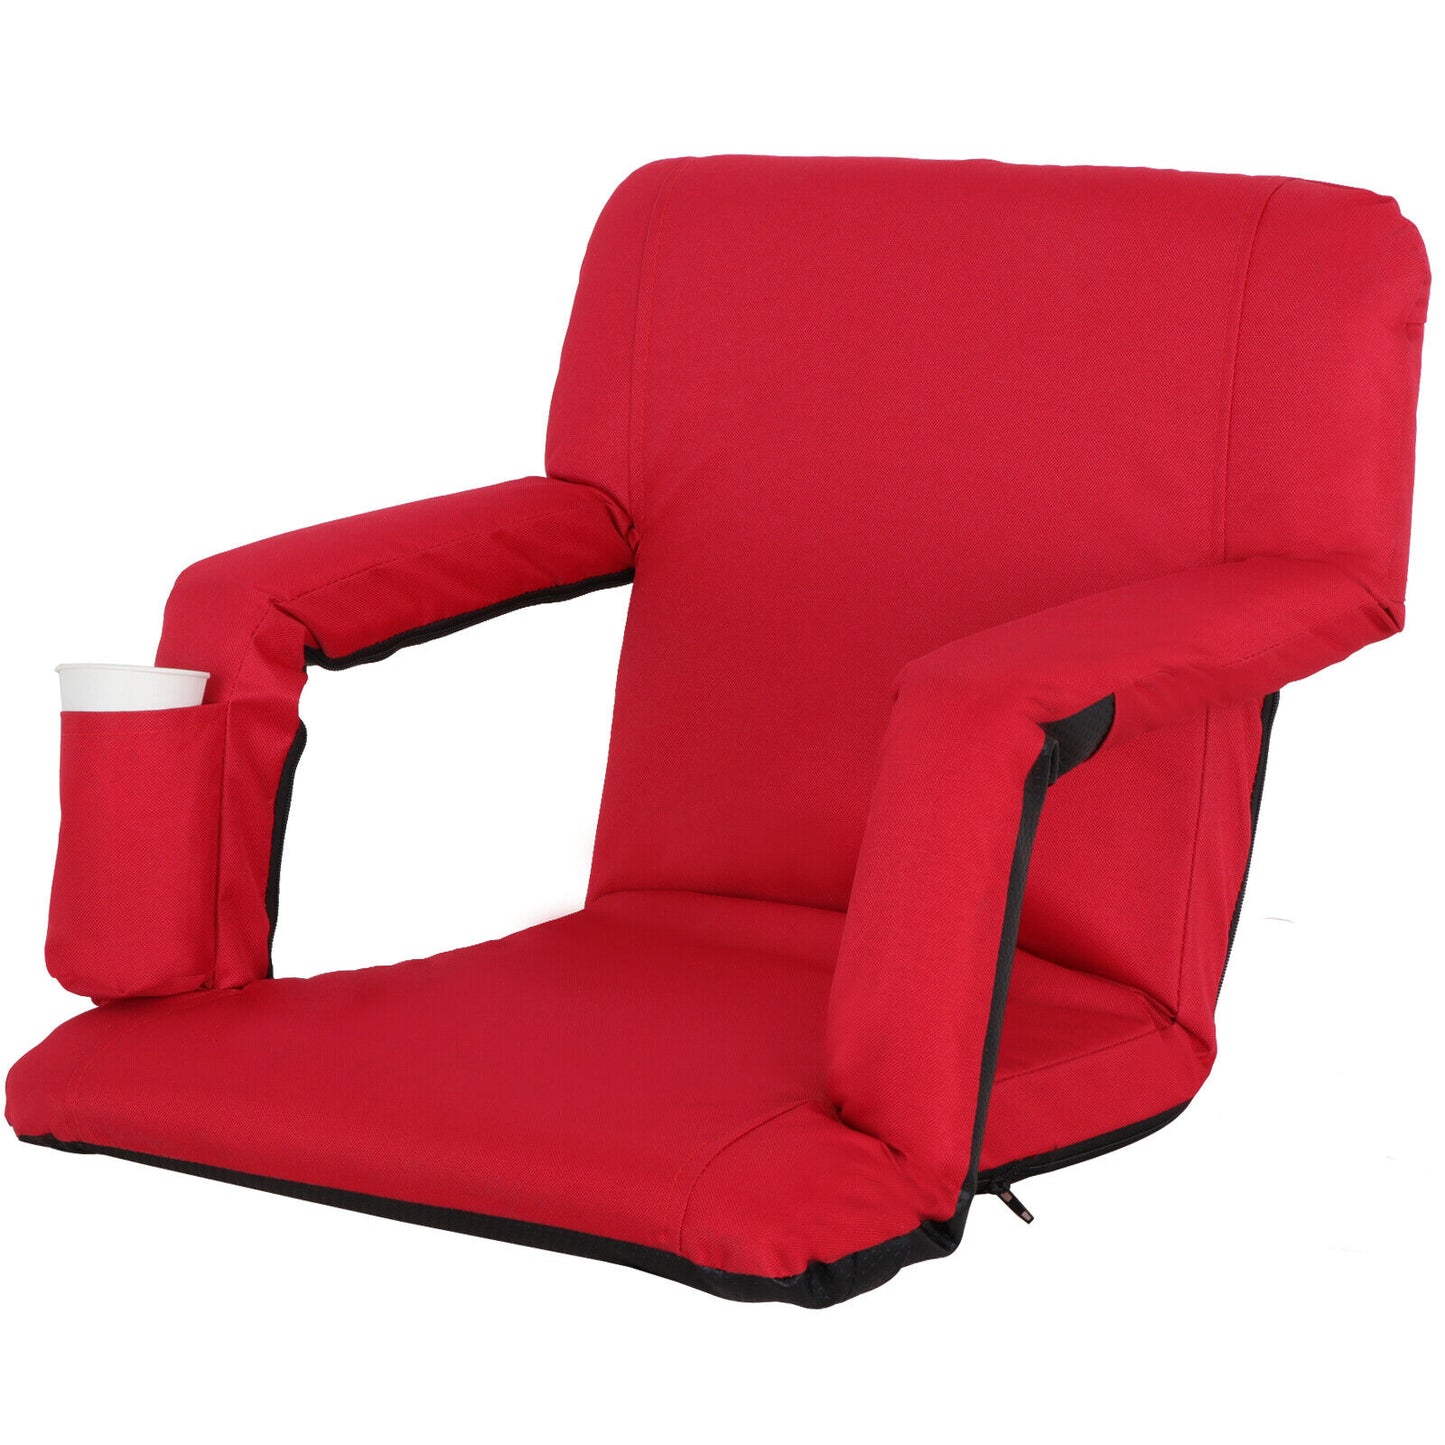 Red Wide Stadium Seats Chairs for Bleachers or Benches - 5 Reclining Positions